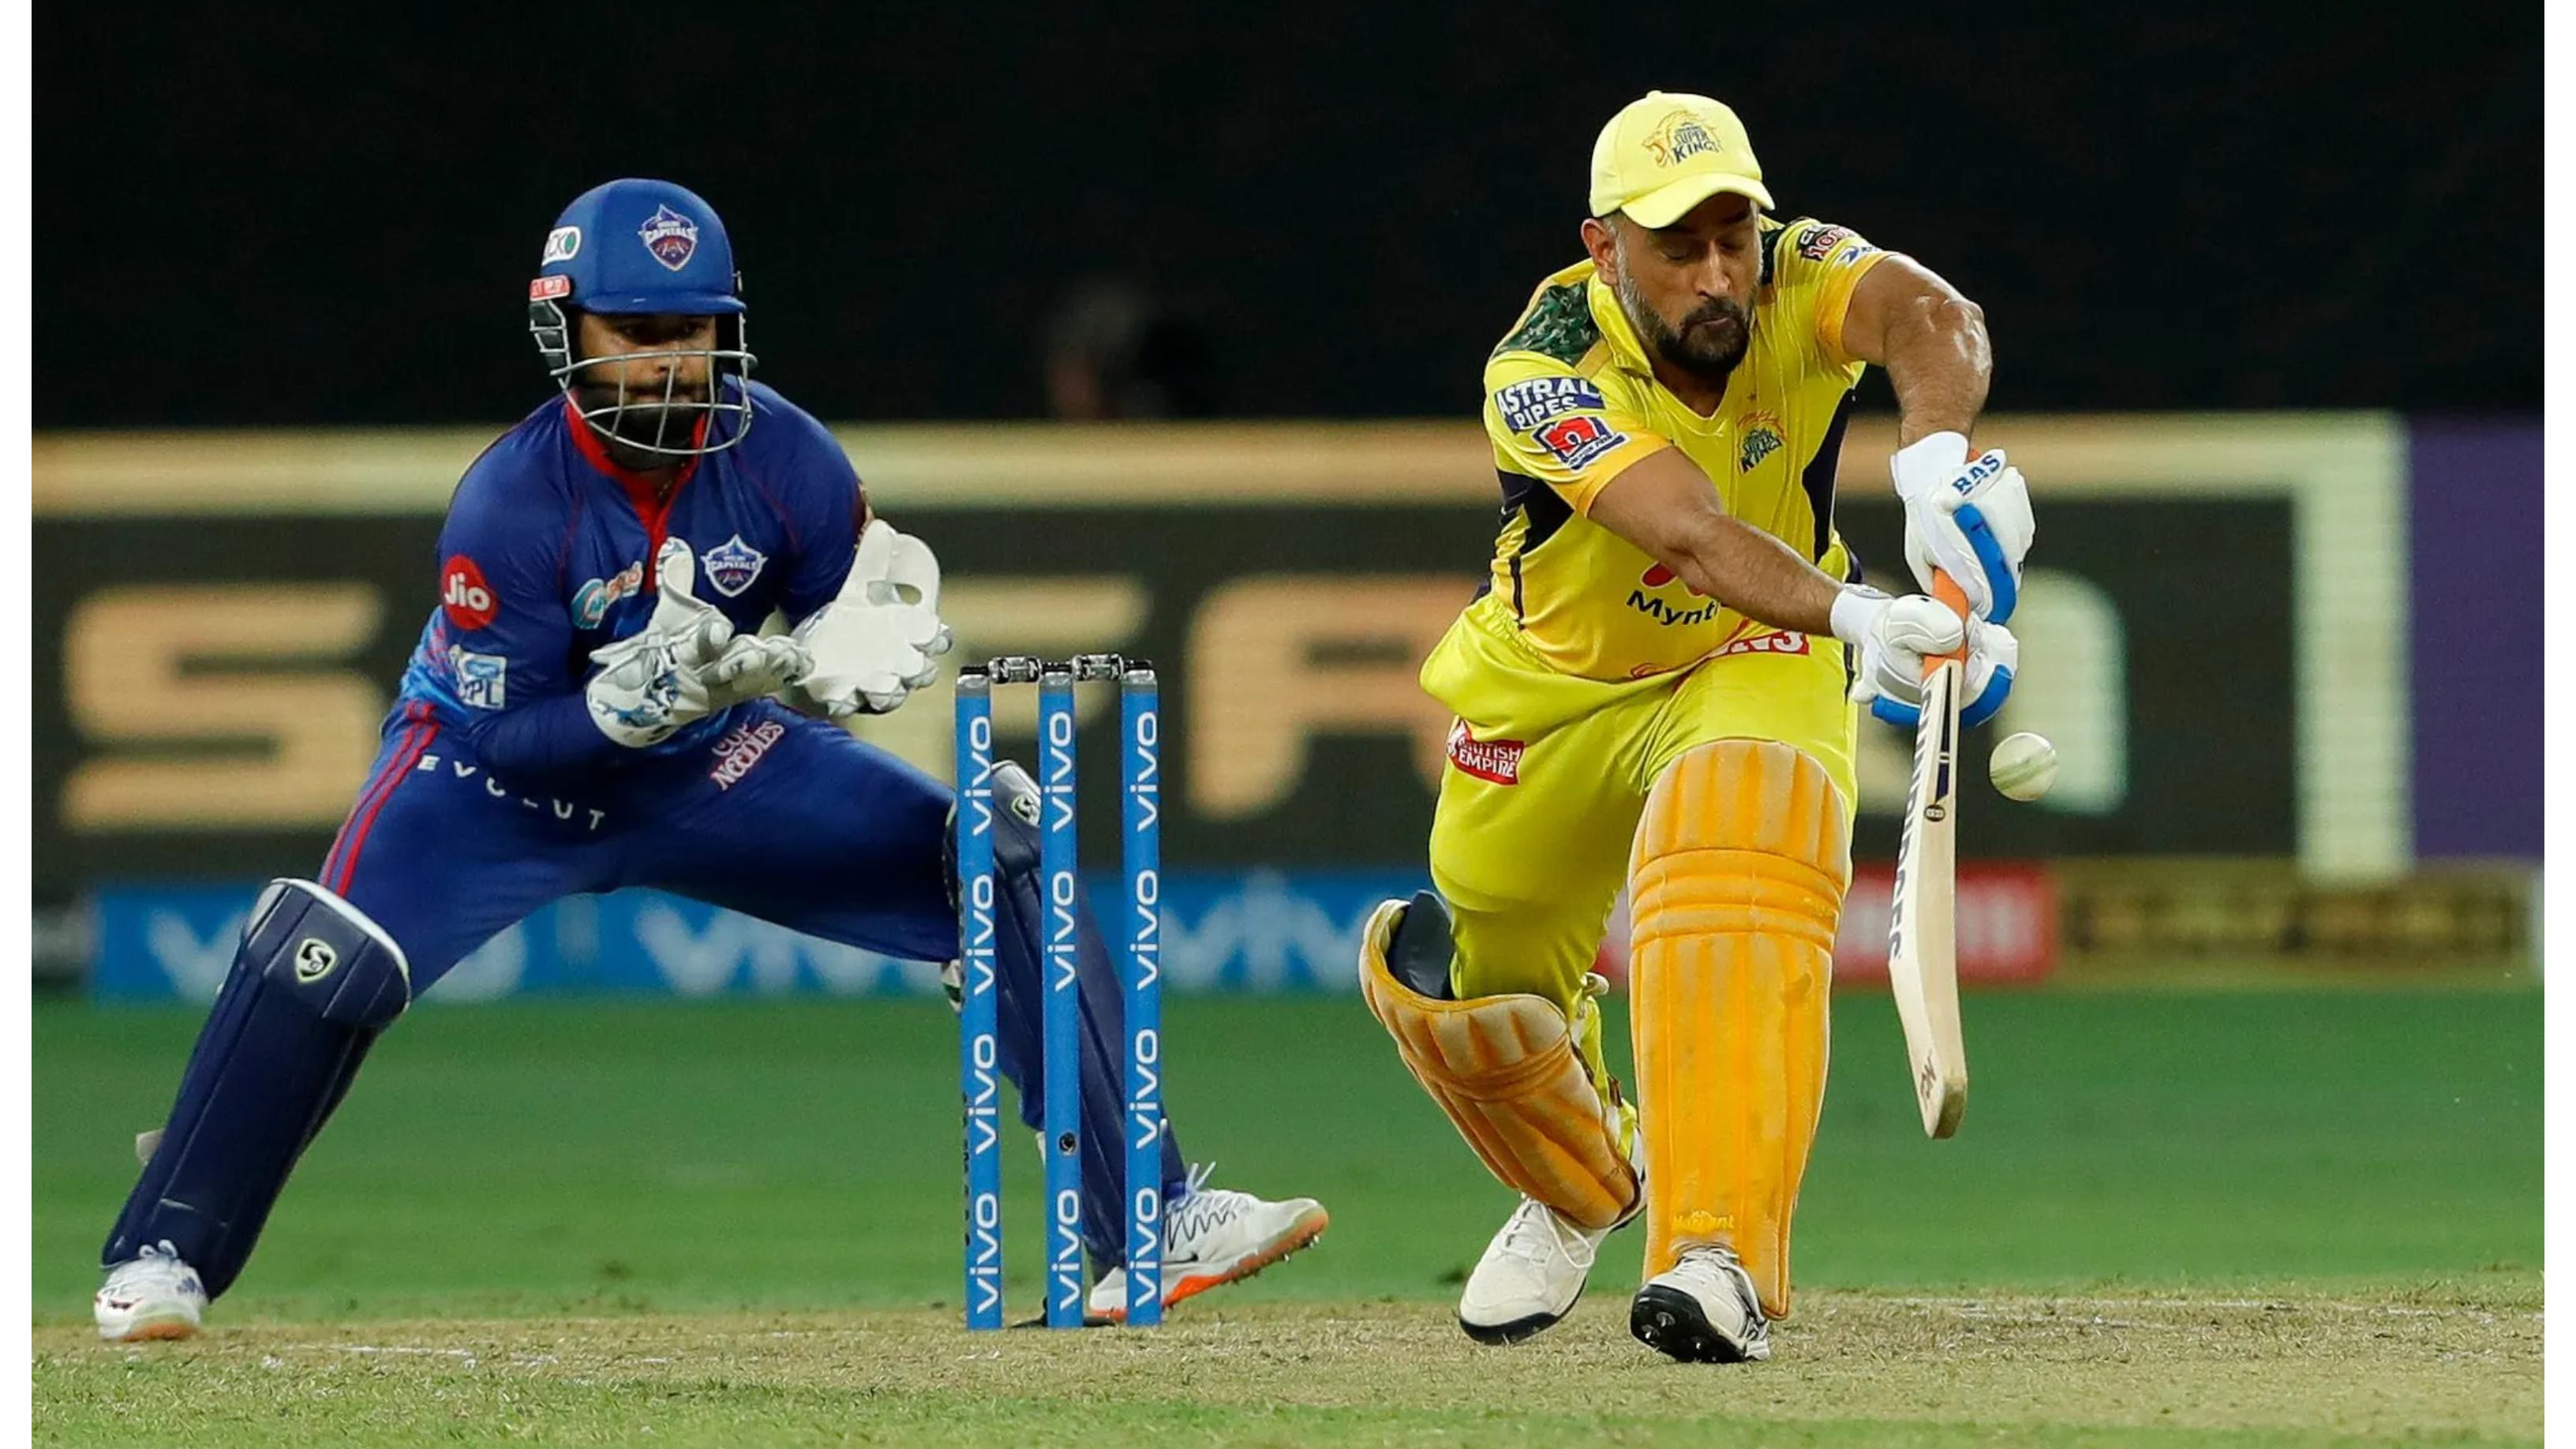 IPL 2021: Fans react to CSK skipper MS Dhoni's turtle-paced knock against Delhi Capitals